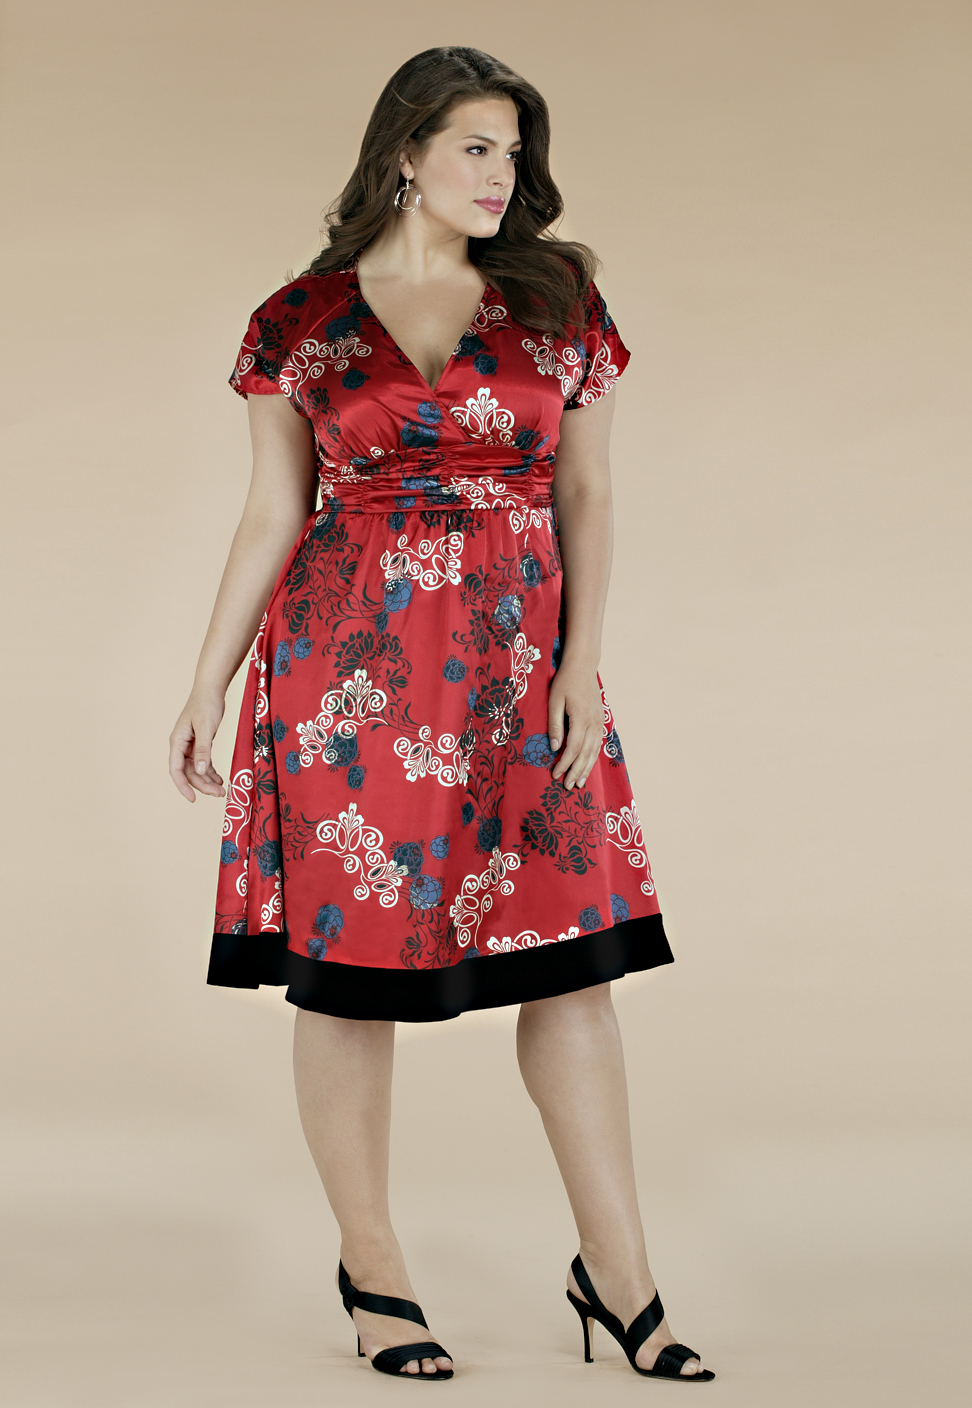 Download this Plus Size Clothing picture